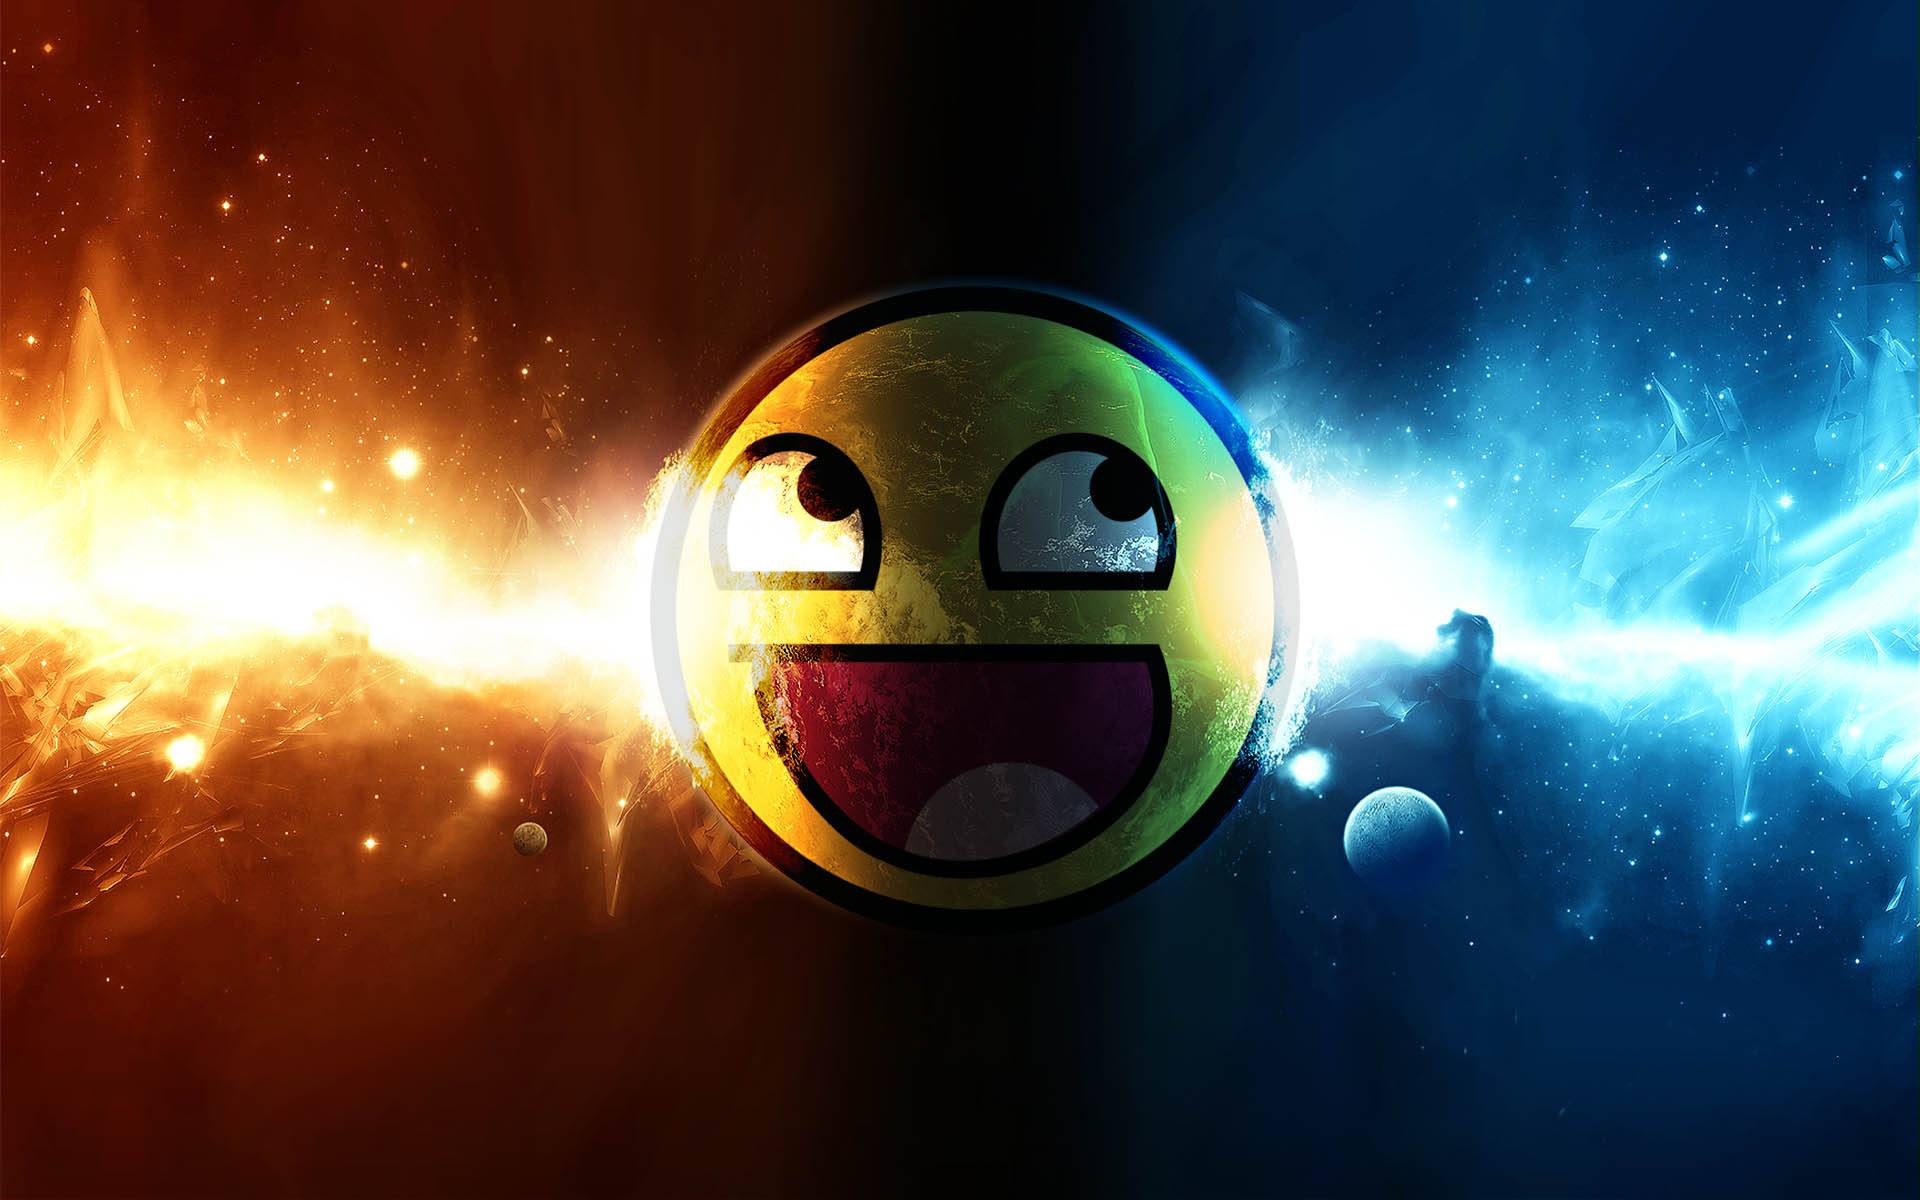 Awesome Smiley Background HD Wallpaper In Others Imageci